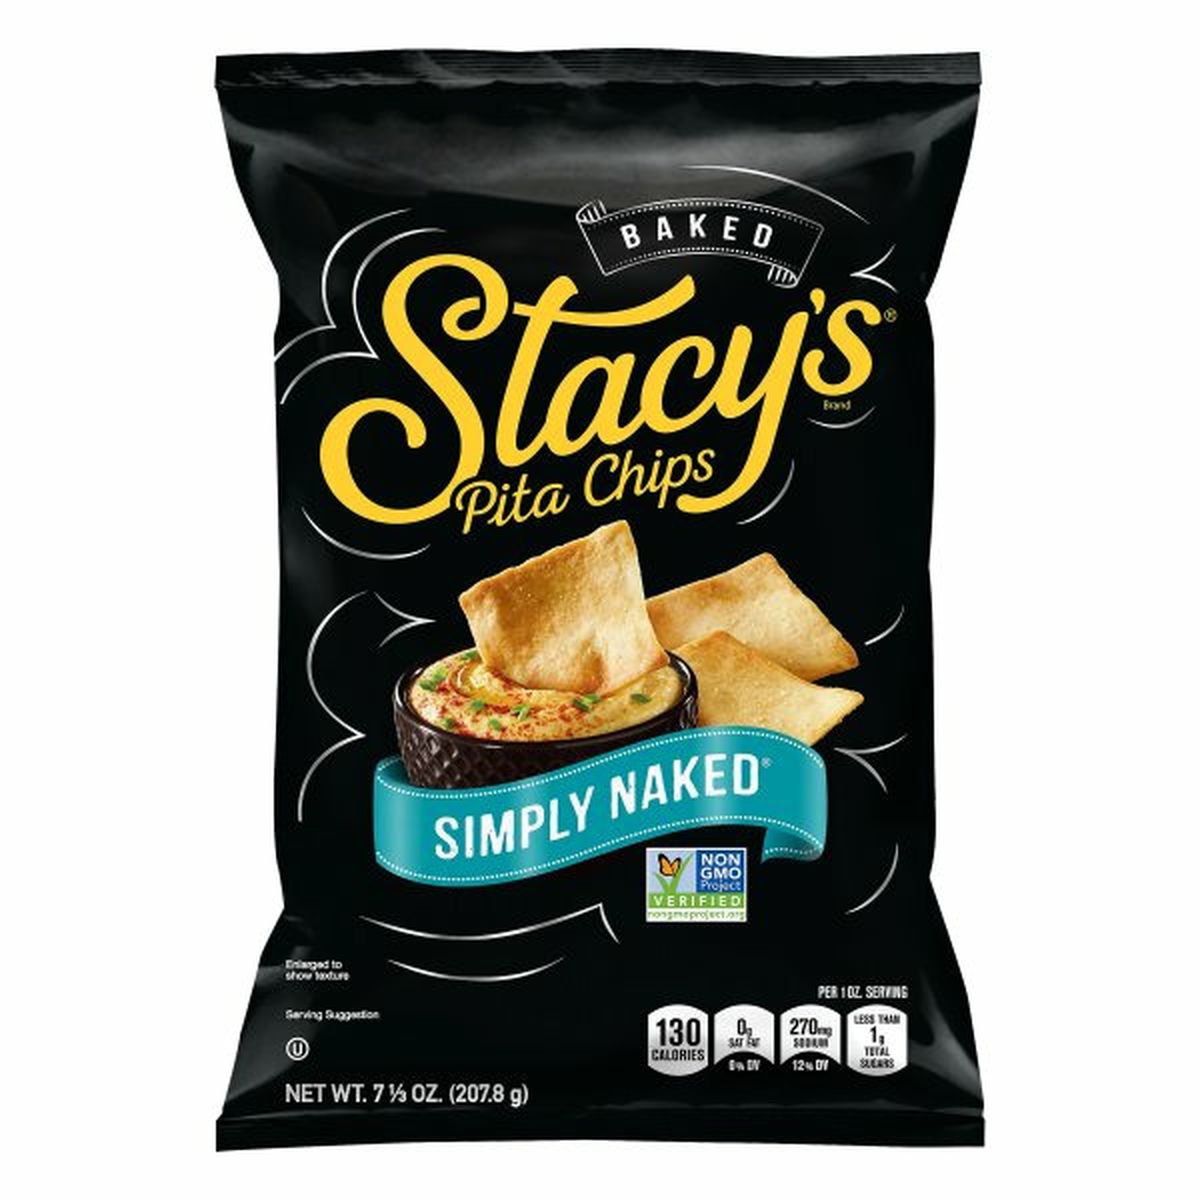 Calories in Stacy's Pita Chips, Simply Naked, Baked